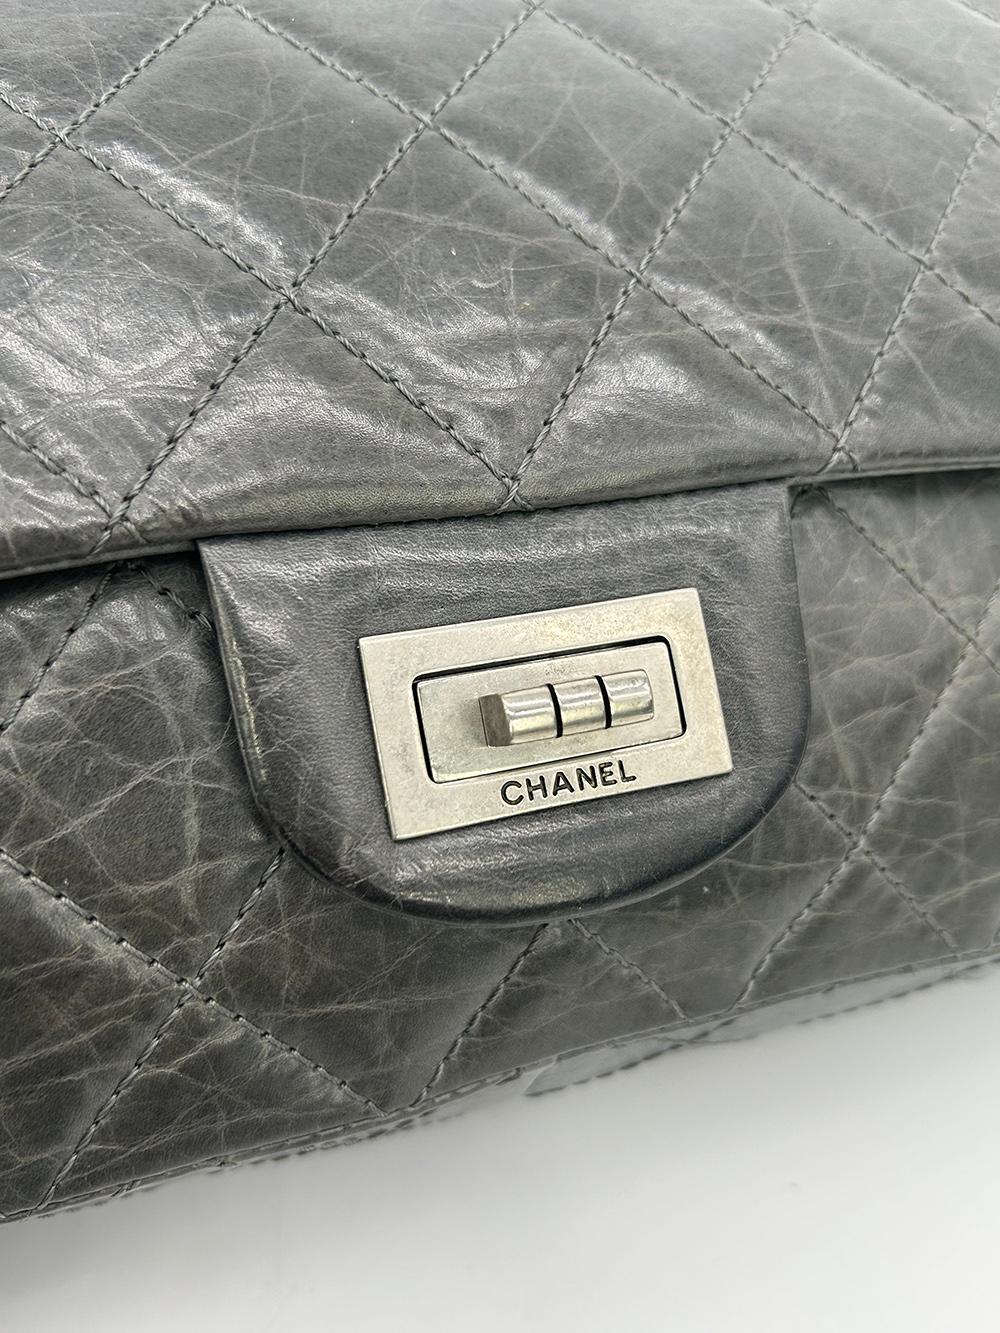 Chanel Grey Aged Calfskin Anniversary 2.55 Reissue 227 Double Flap Bag 1